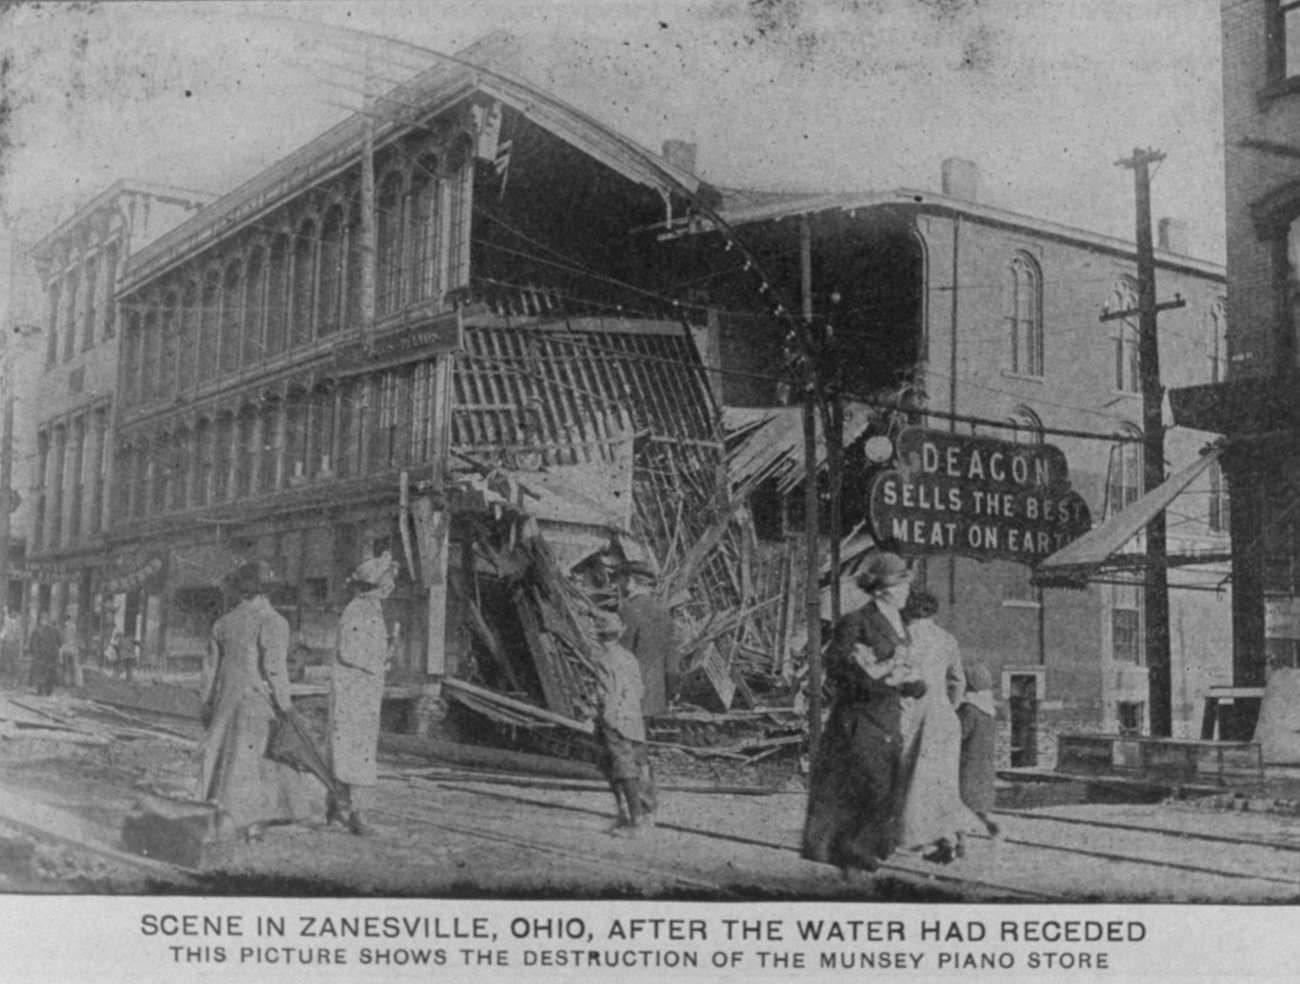 The Munsey piano store in Zanesville was destroyed by the flood